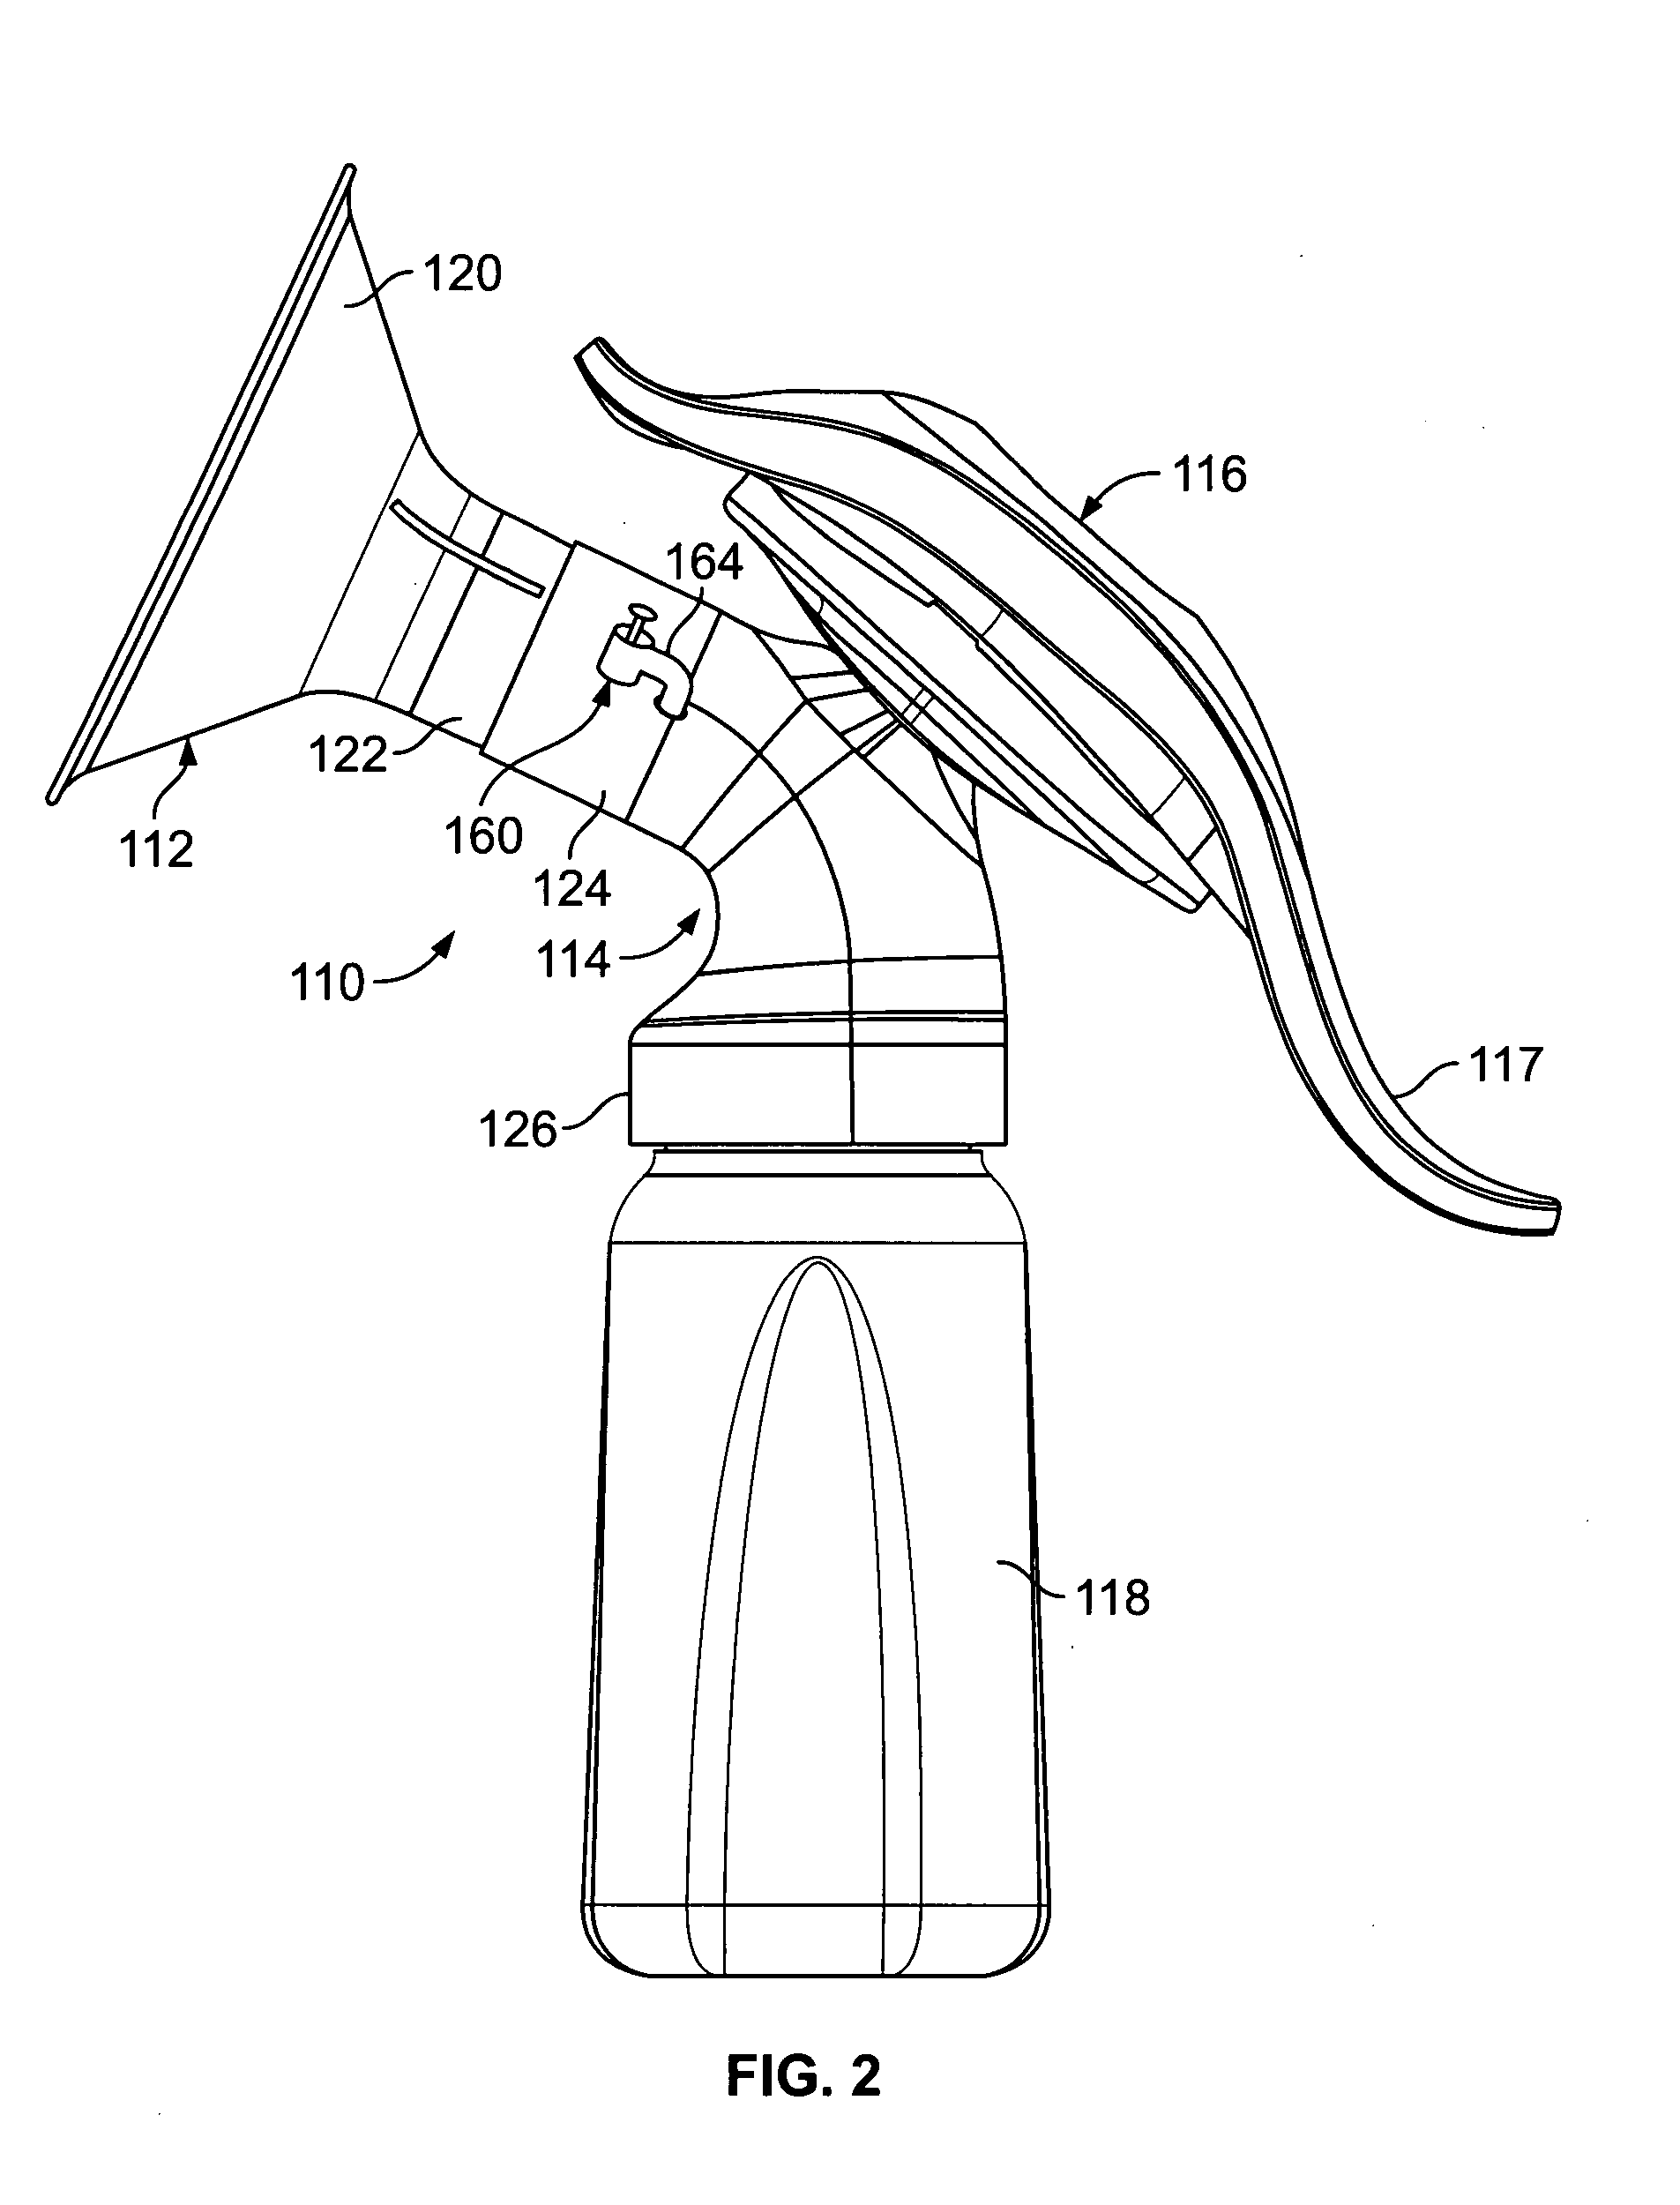 Method and apparatus for minimum negative pressure control, particularly for breastpump with breastshield pressure control system